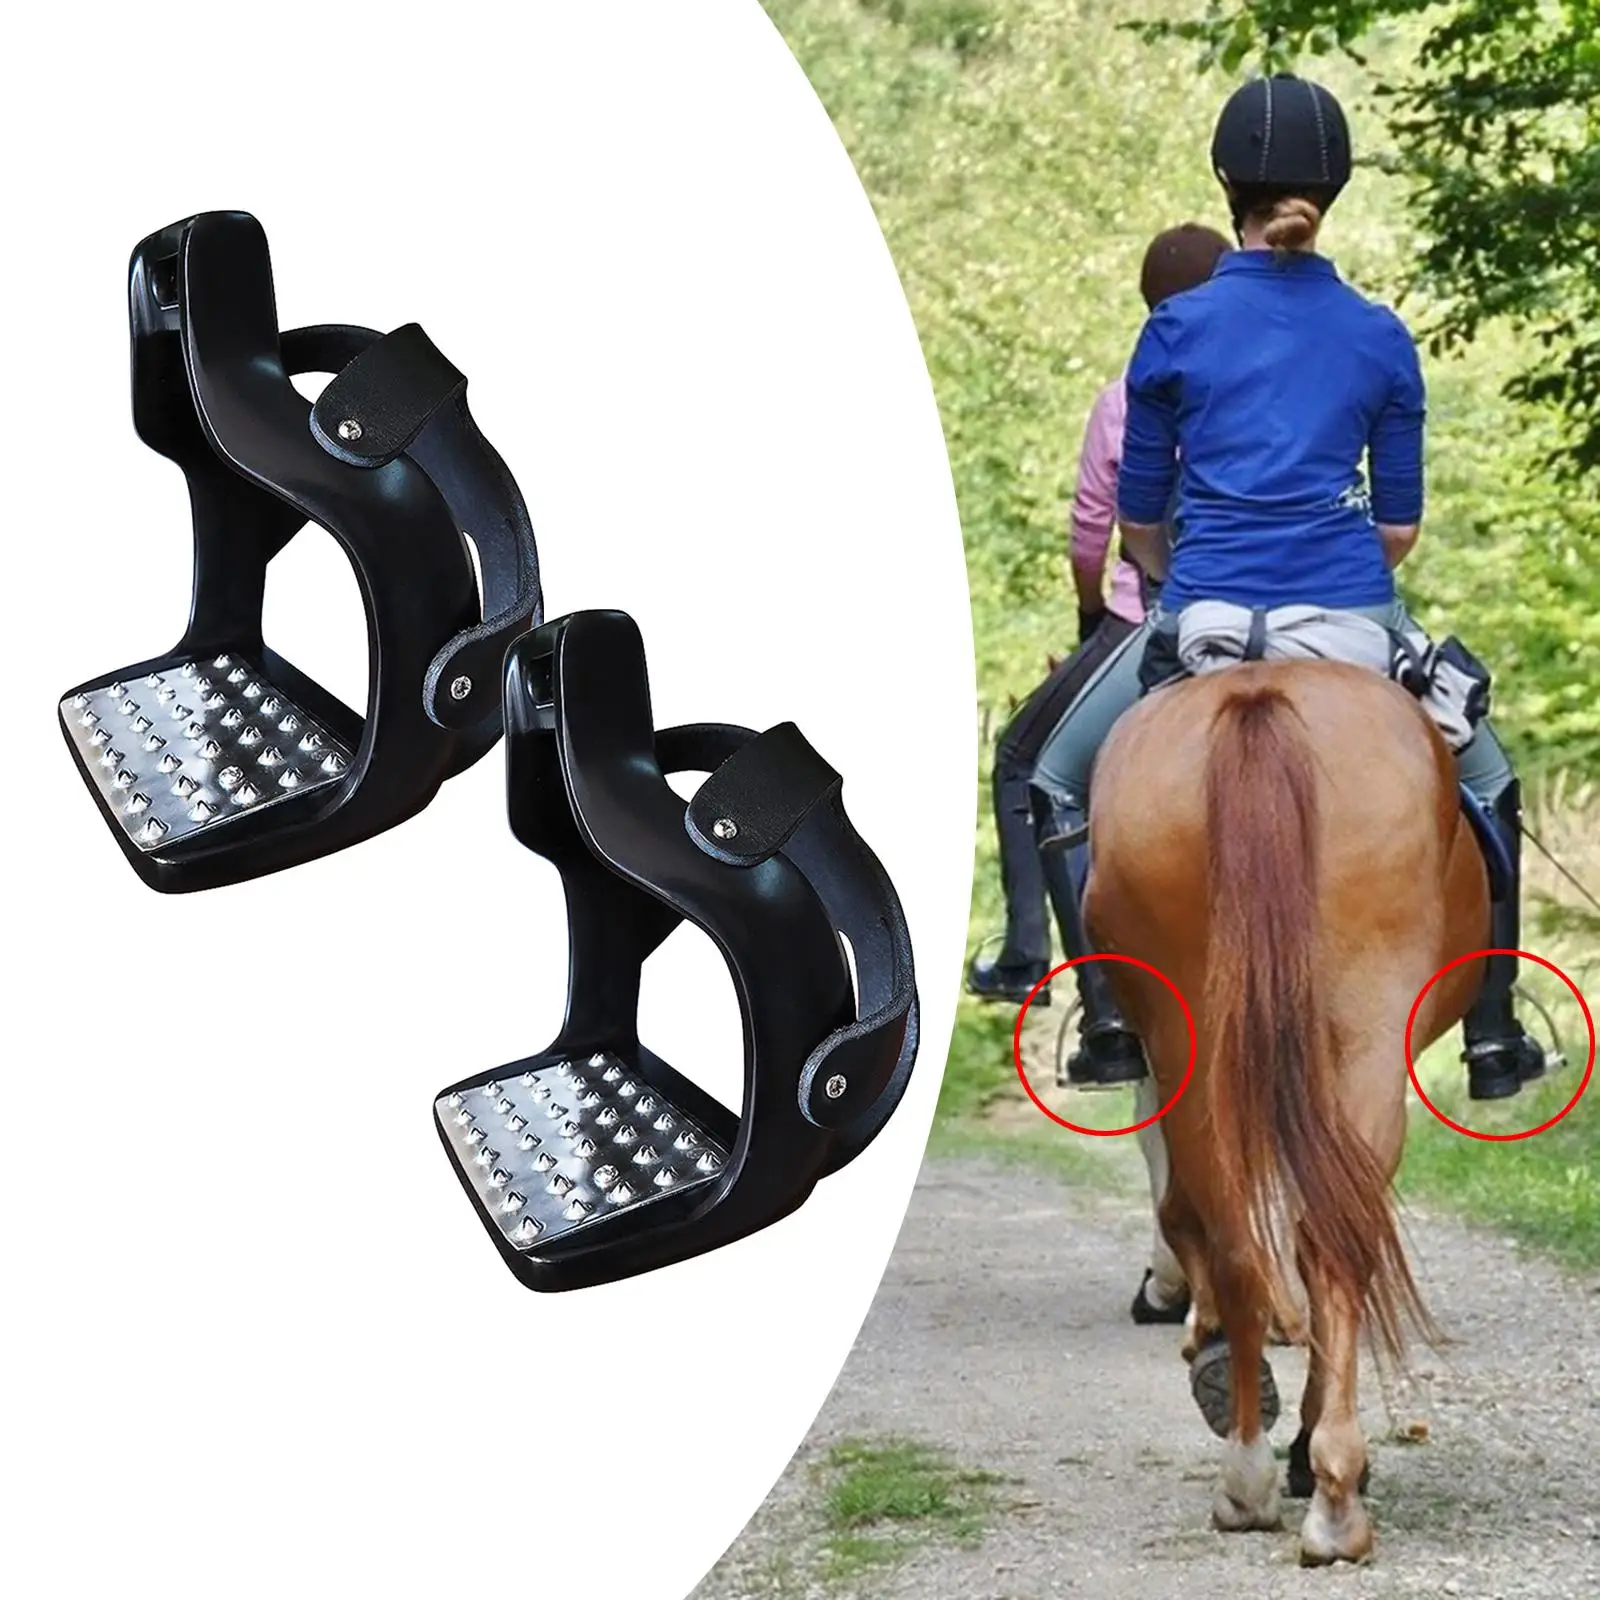 1 Pair Die-Cast Aluminum Saddle Stirrup Pedal Wear?Resistant Comfortable Safe Horse Riding Equipment with Net Cover